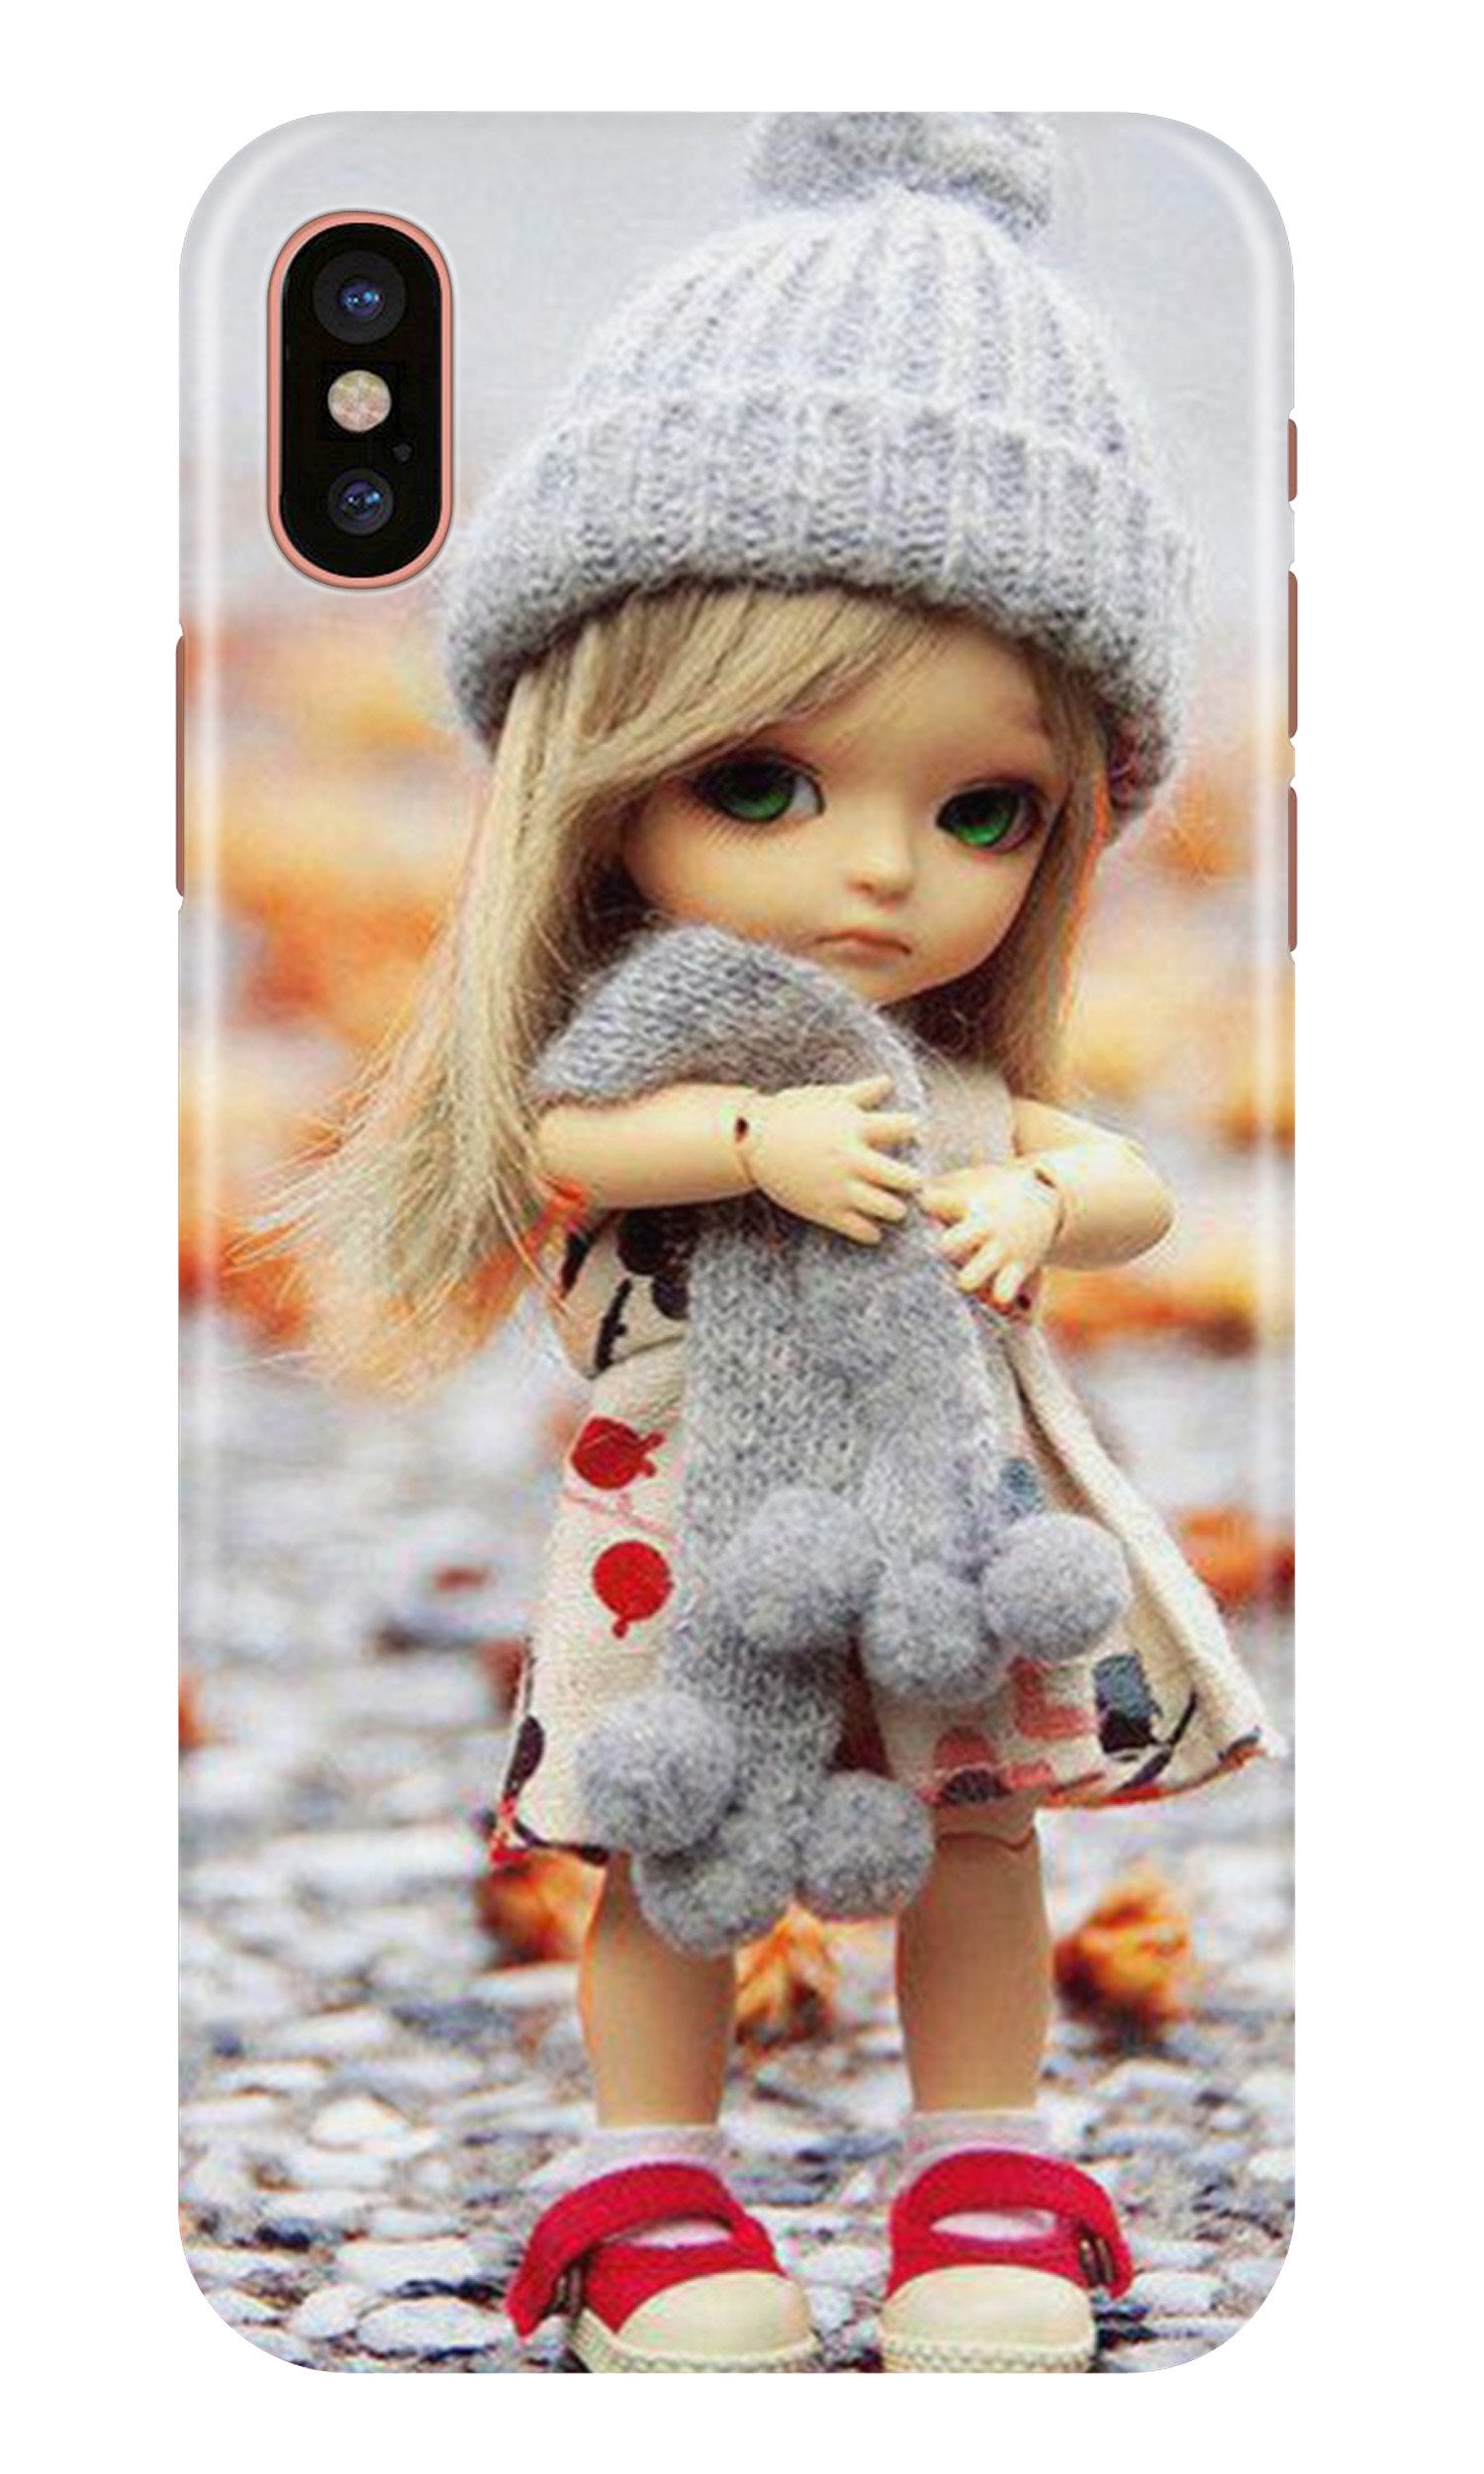 Cute Doll Case for iPhone X